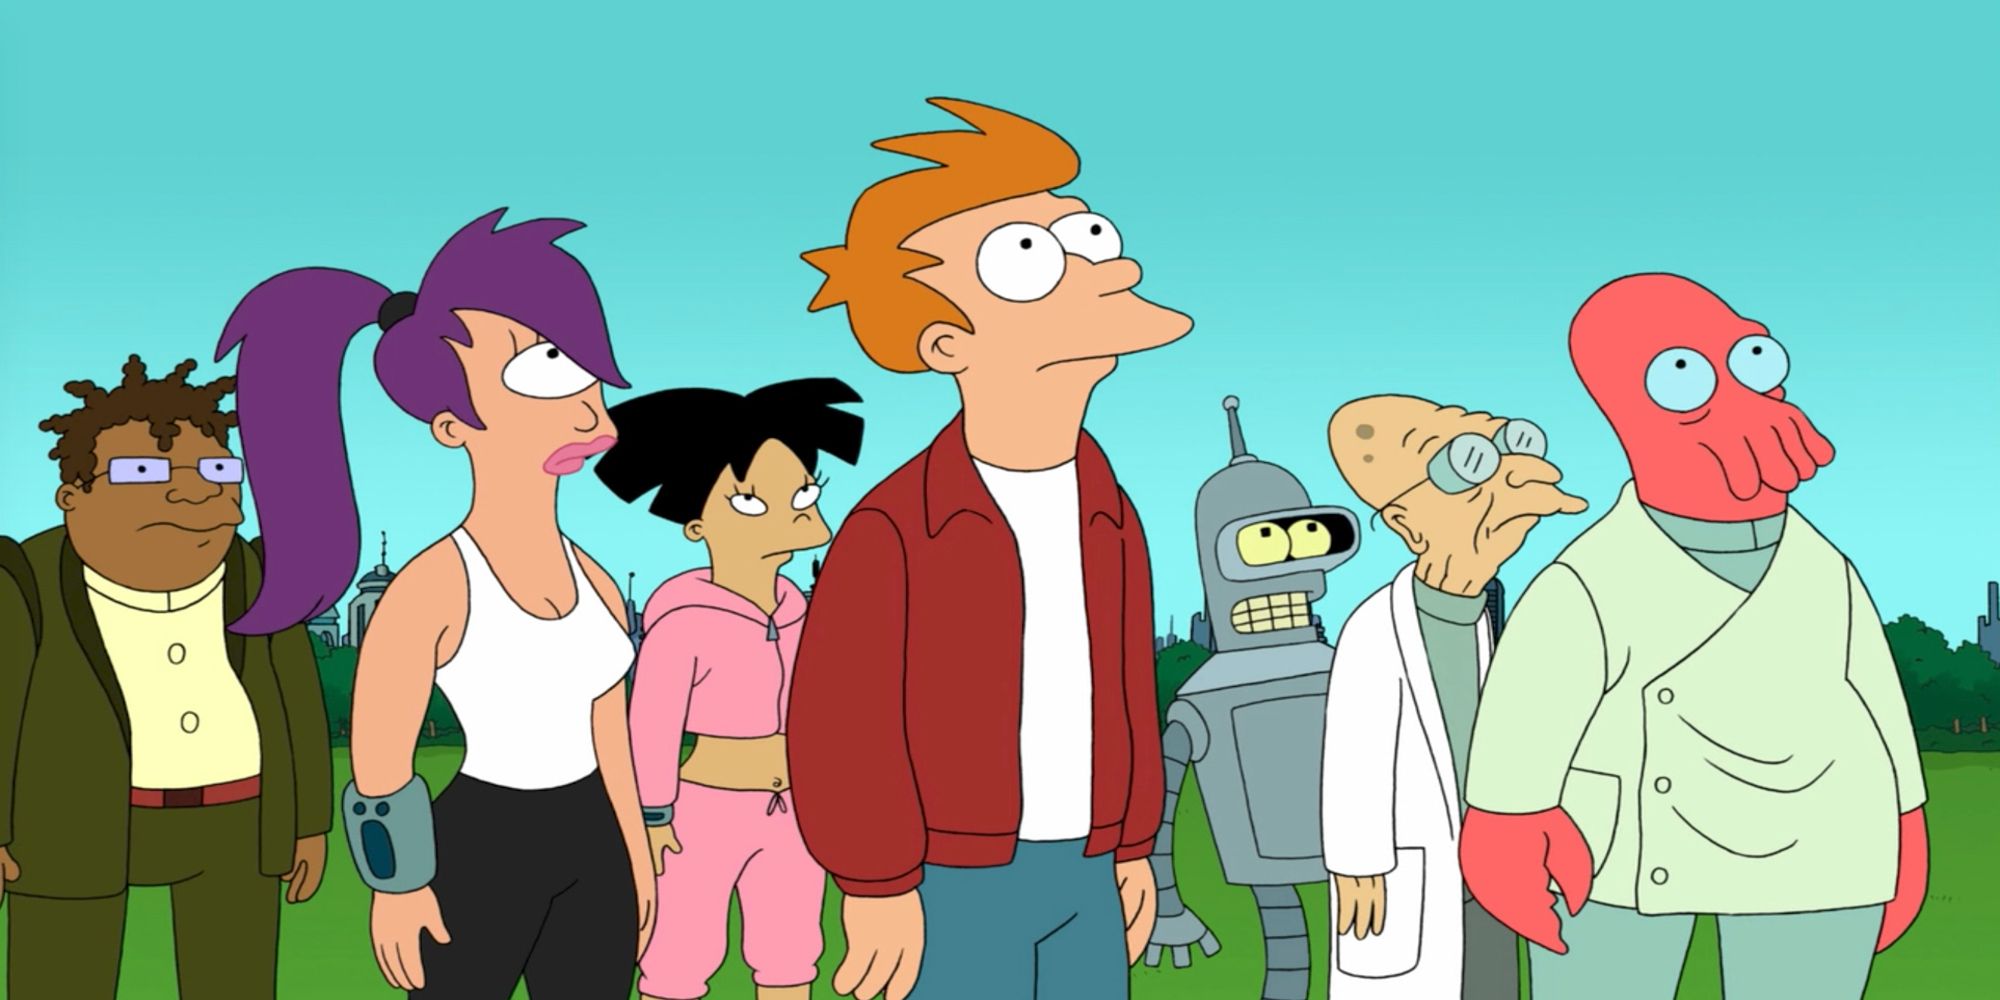 Cast of characters from the animated series Futurama.